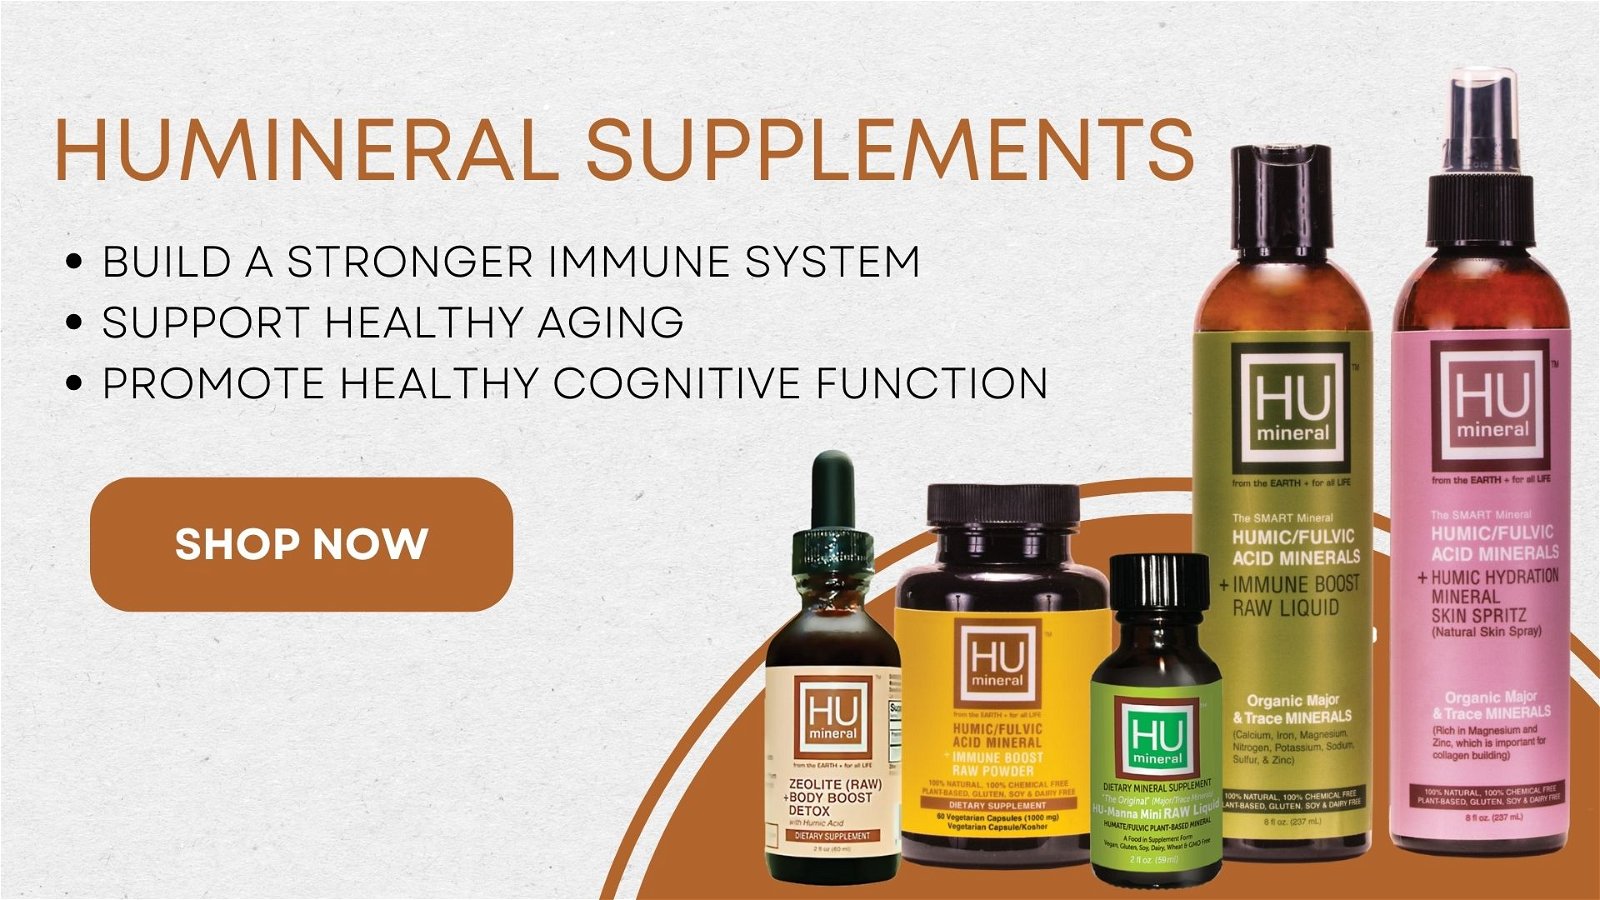 HUMINERAL SUPPLEMENTS